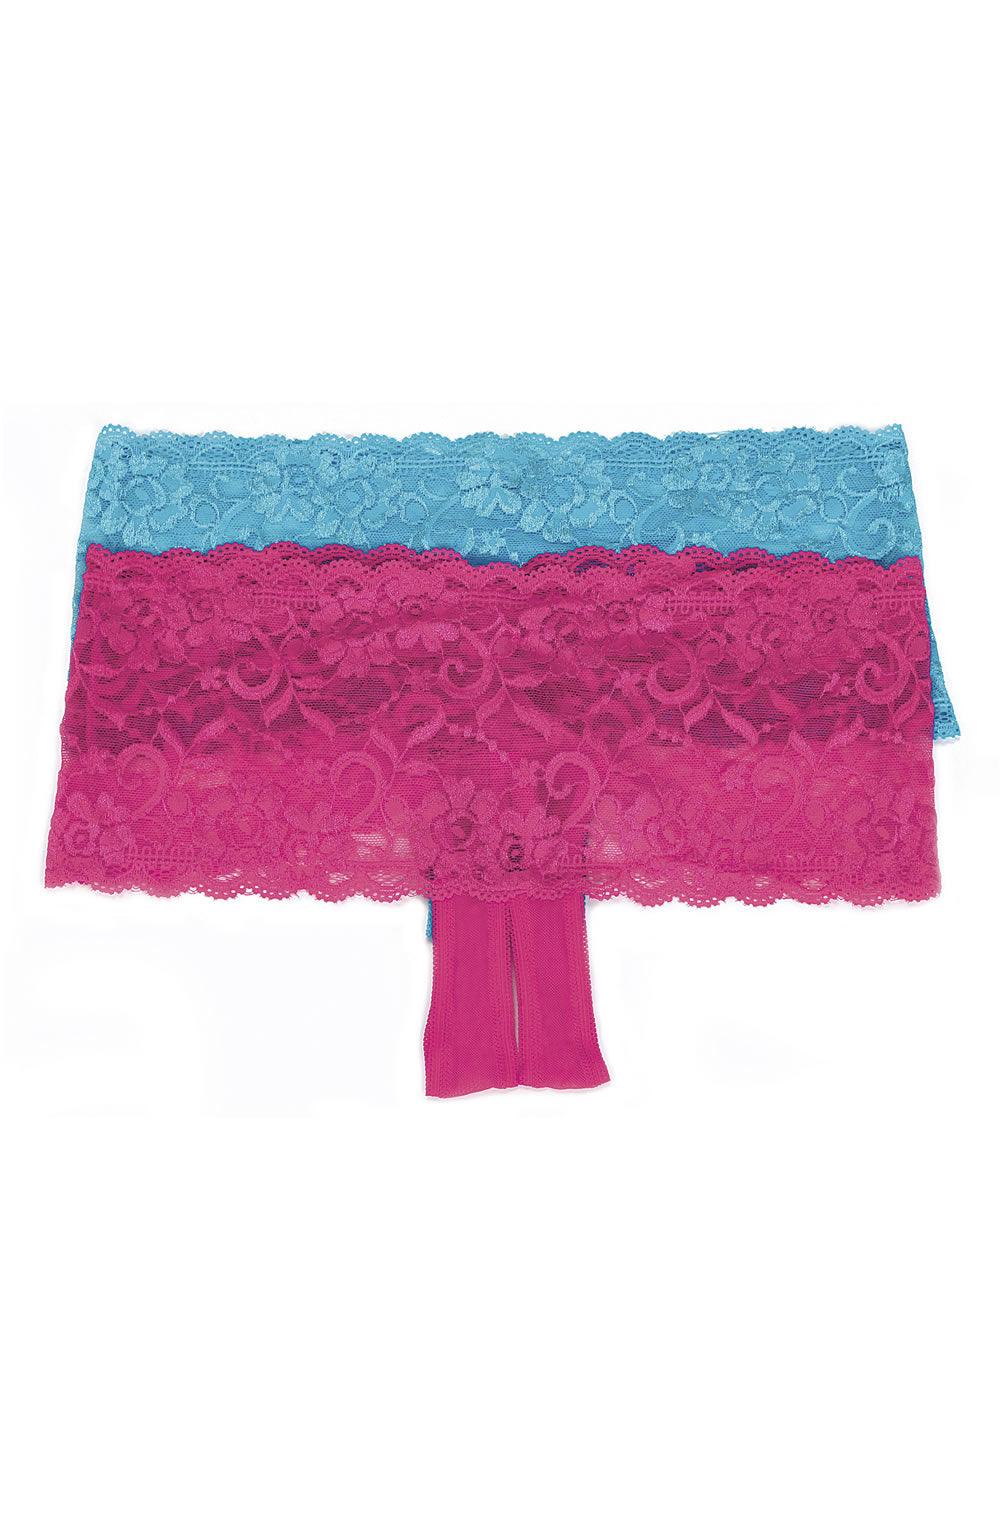 Shirley of Hollywood SoH 59 Stretch Lace Boy Short Turquoise - Sydney Rose Lingerie 